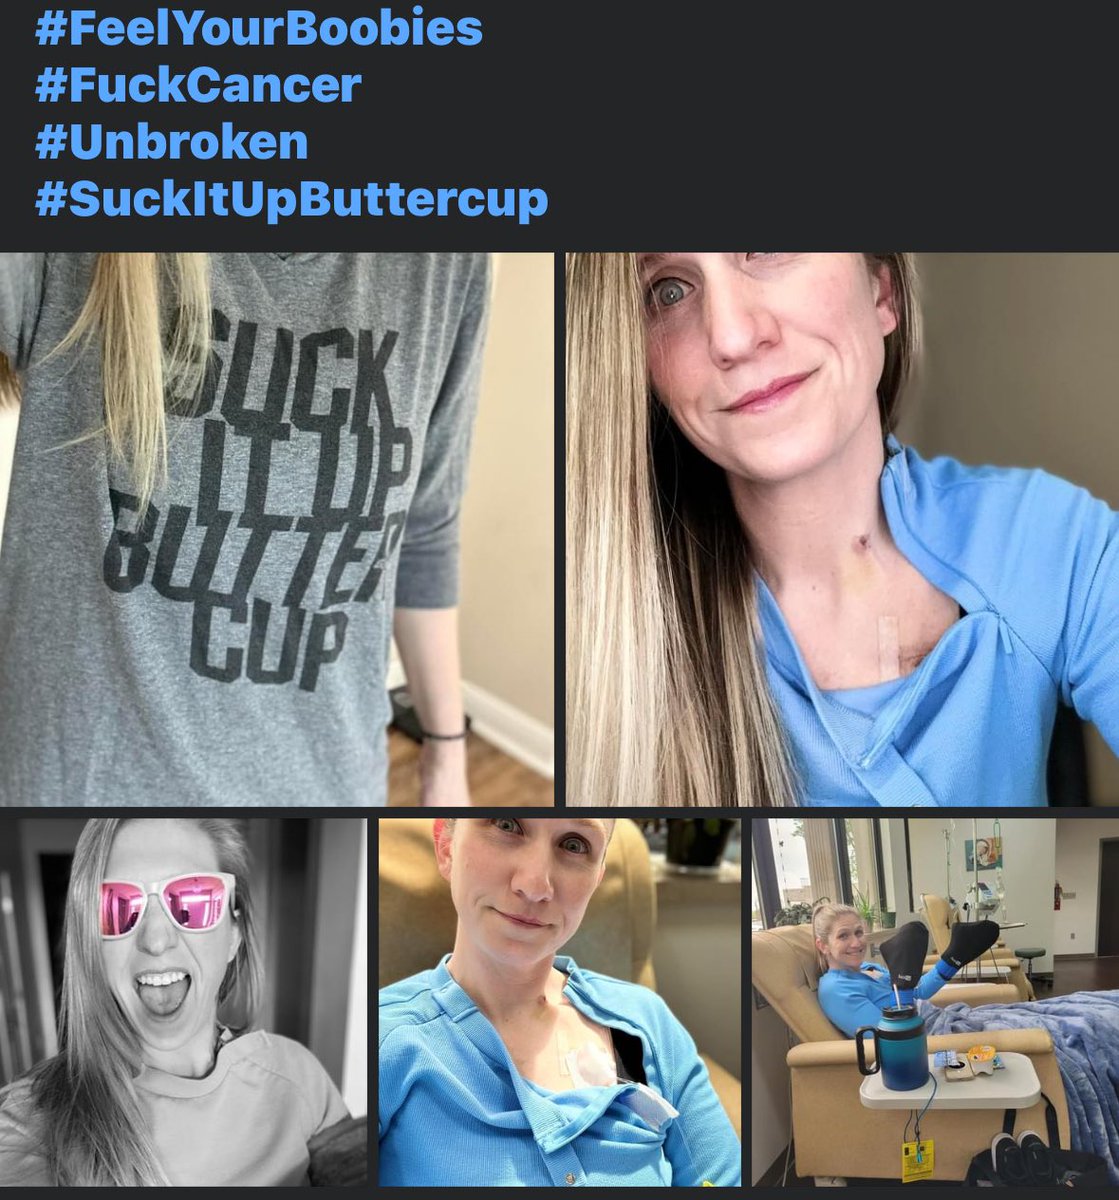 A year ago today, I started my first round of chemo. Today, I stand #CancerFree. 

Be fearless in your struggles. Always maintain a sense of humor and remember… “It could always be worse.” 

#FuckCancer
#BreastCancer